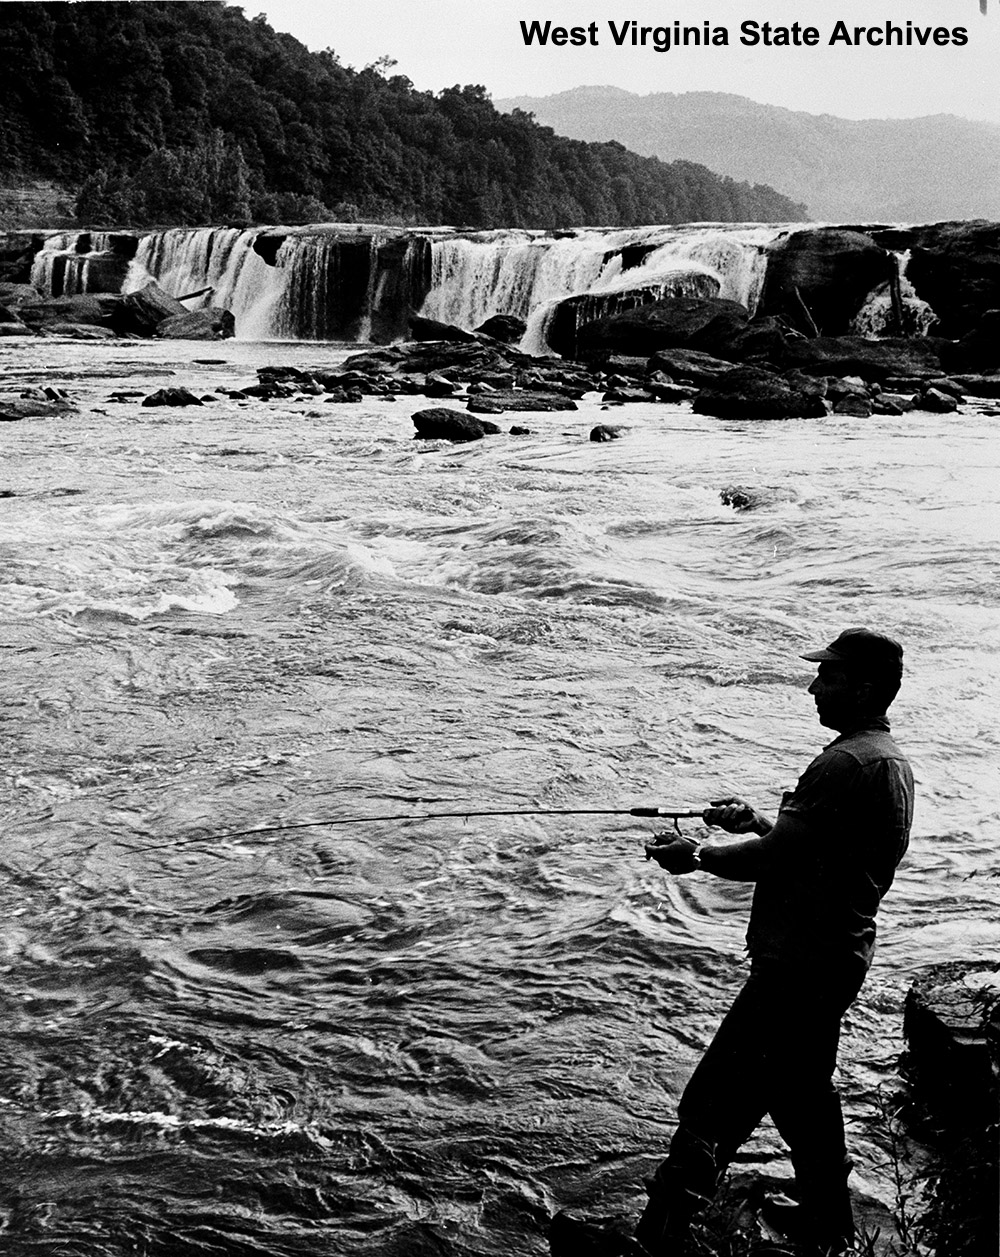 Jerry Deluca fishing on New River at Sandstone Falls, n.d. Arnout Hyde Jr., photographer. Martinsburg Chamber of Commerce Collection, West Virginia State Archives (114205)